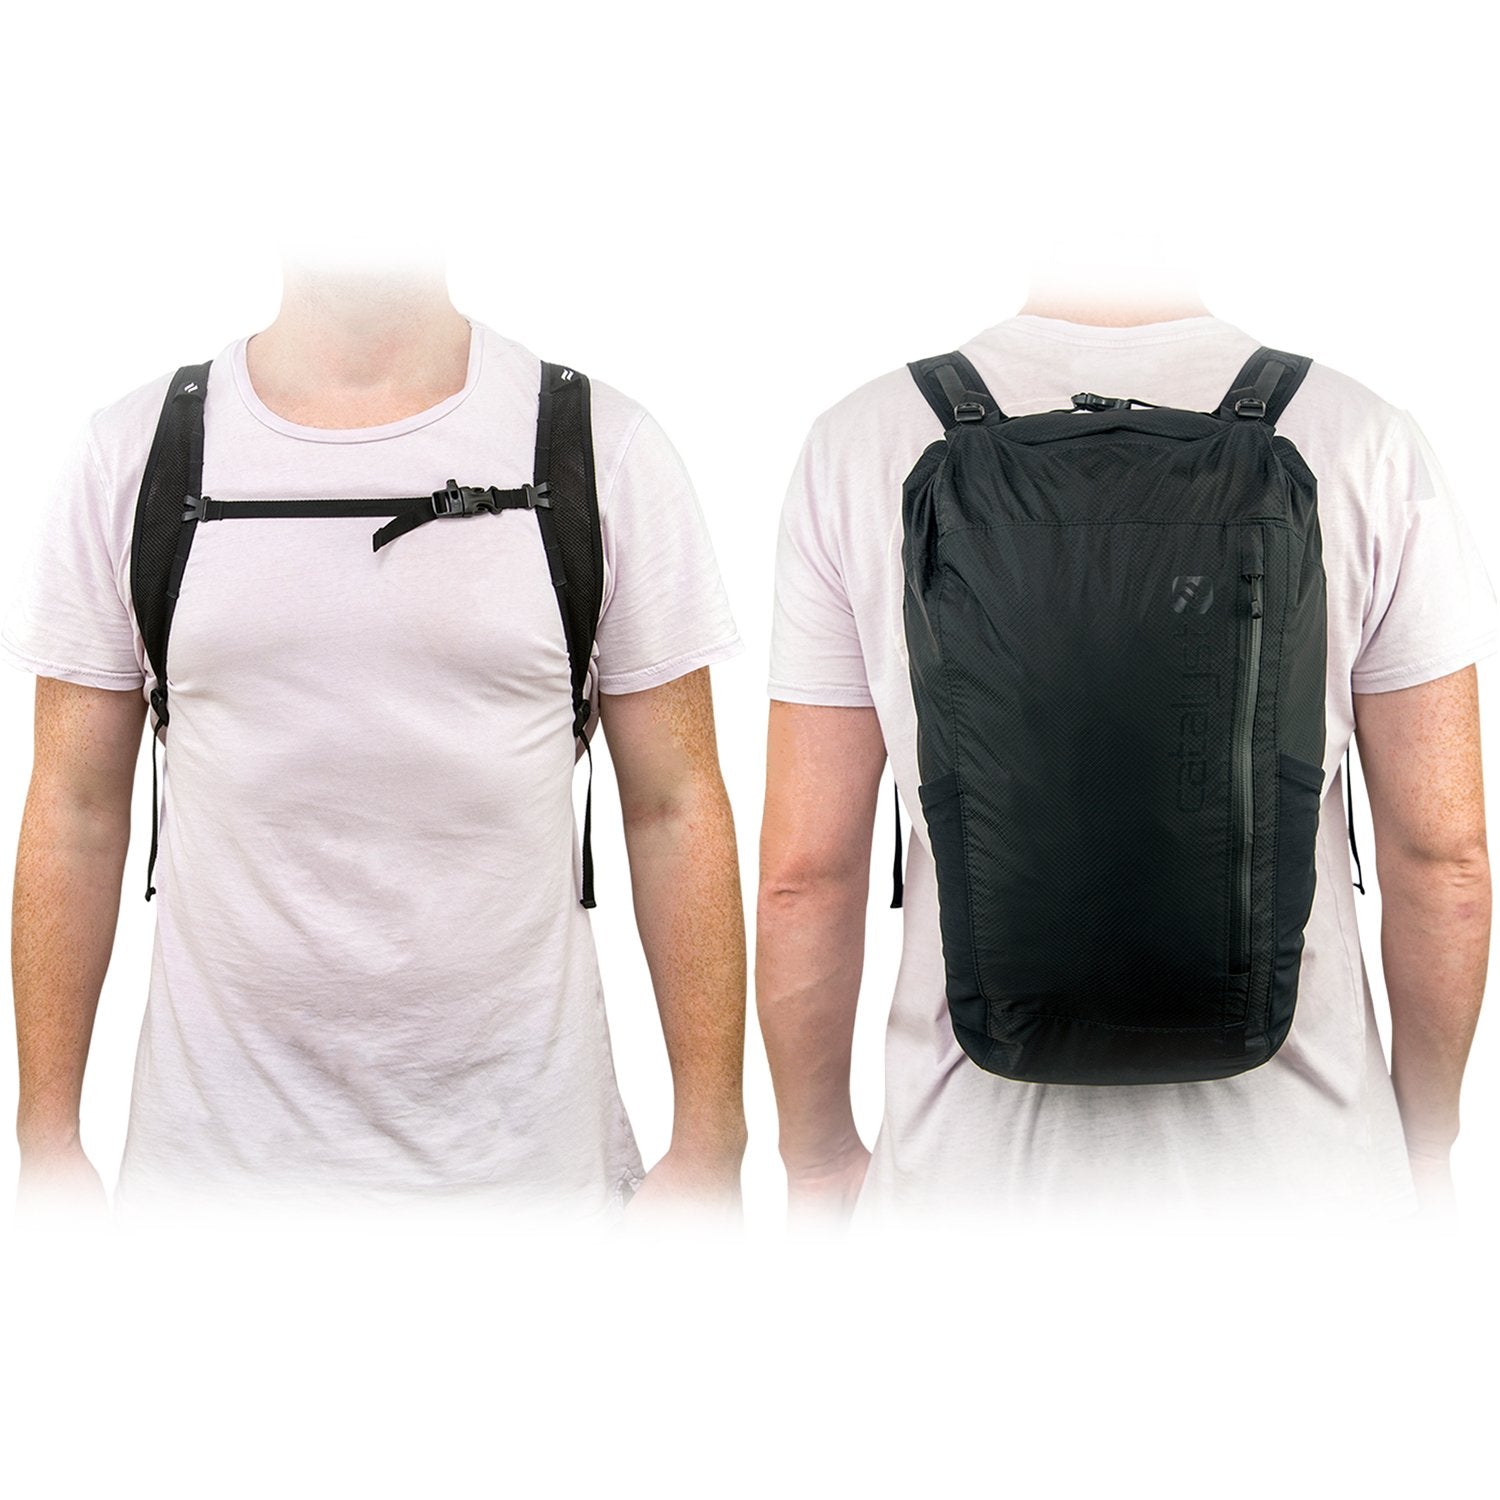 catalyst waterproof 20l backpack man with white shirt with the backpack